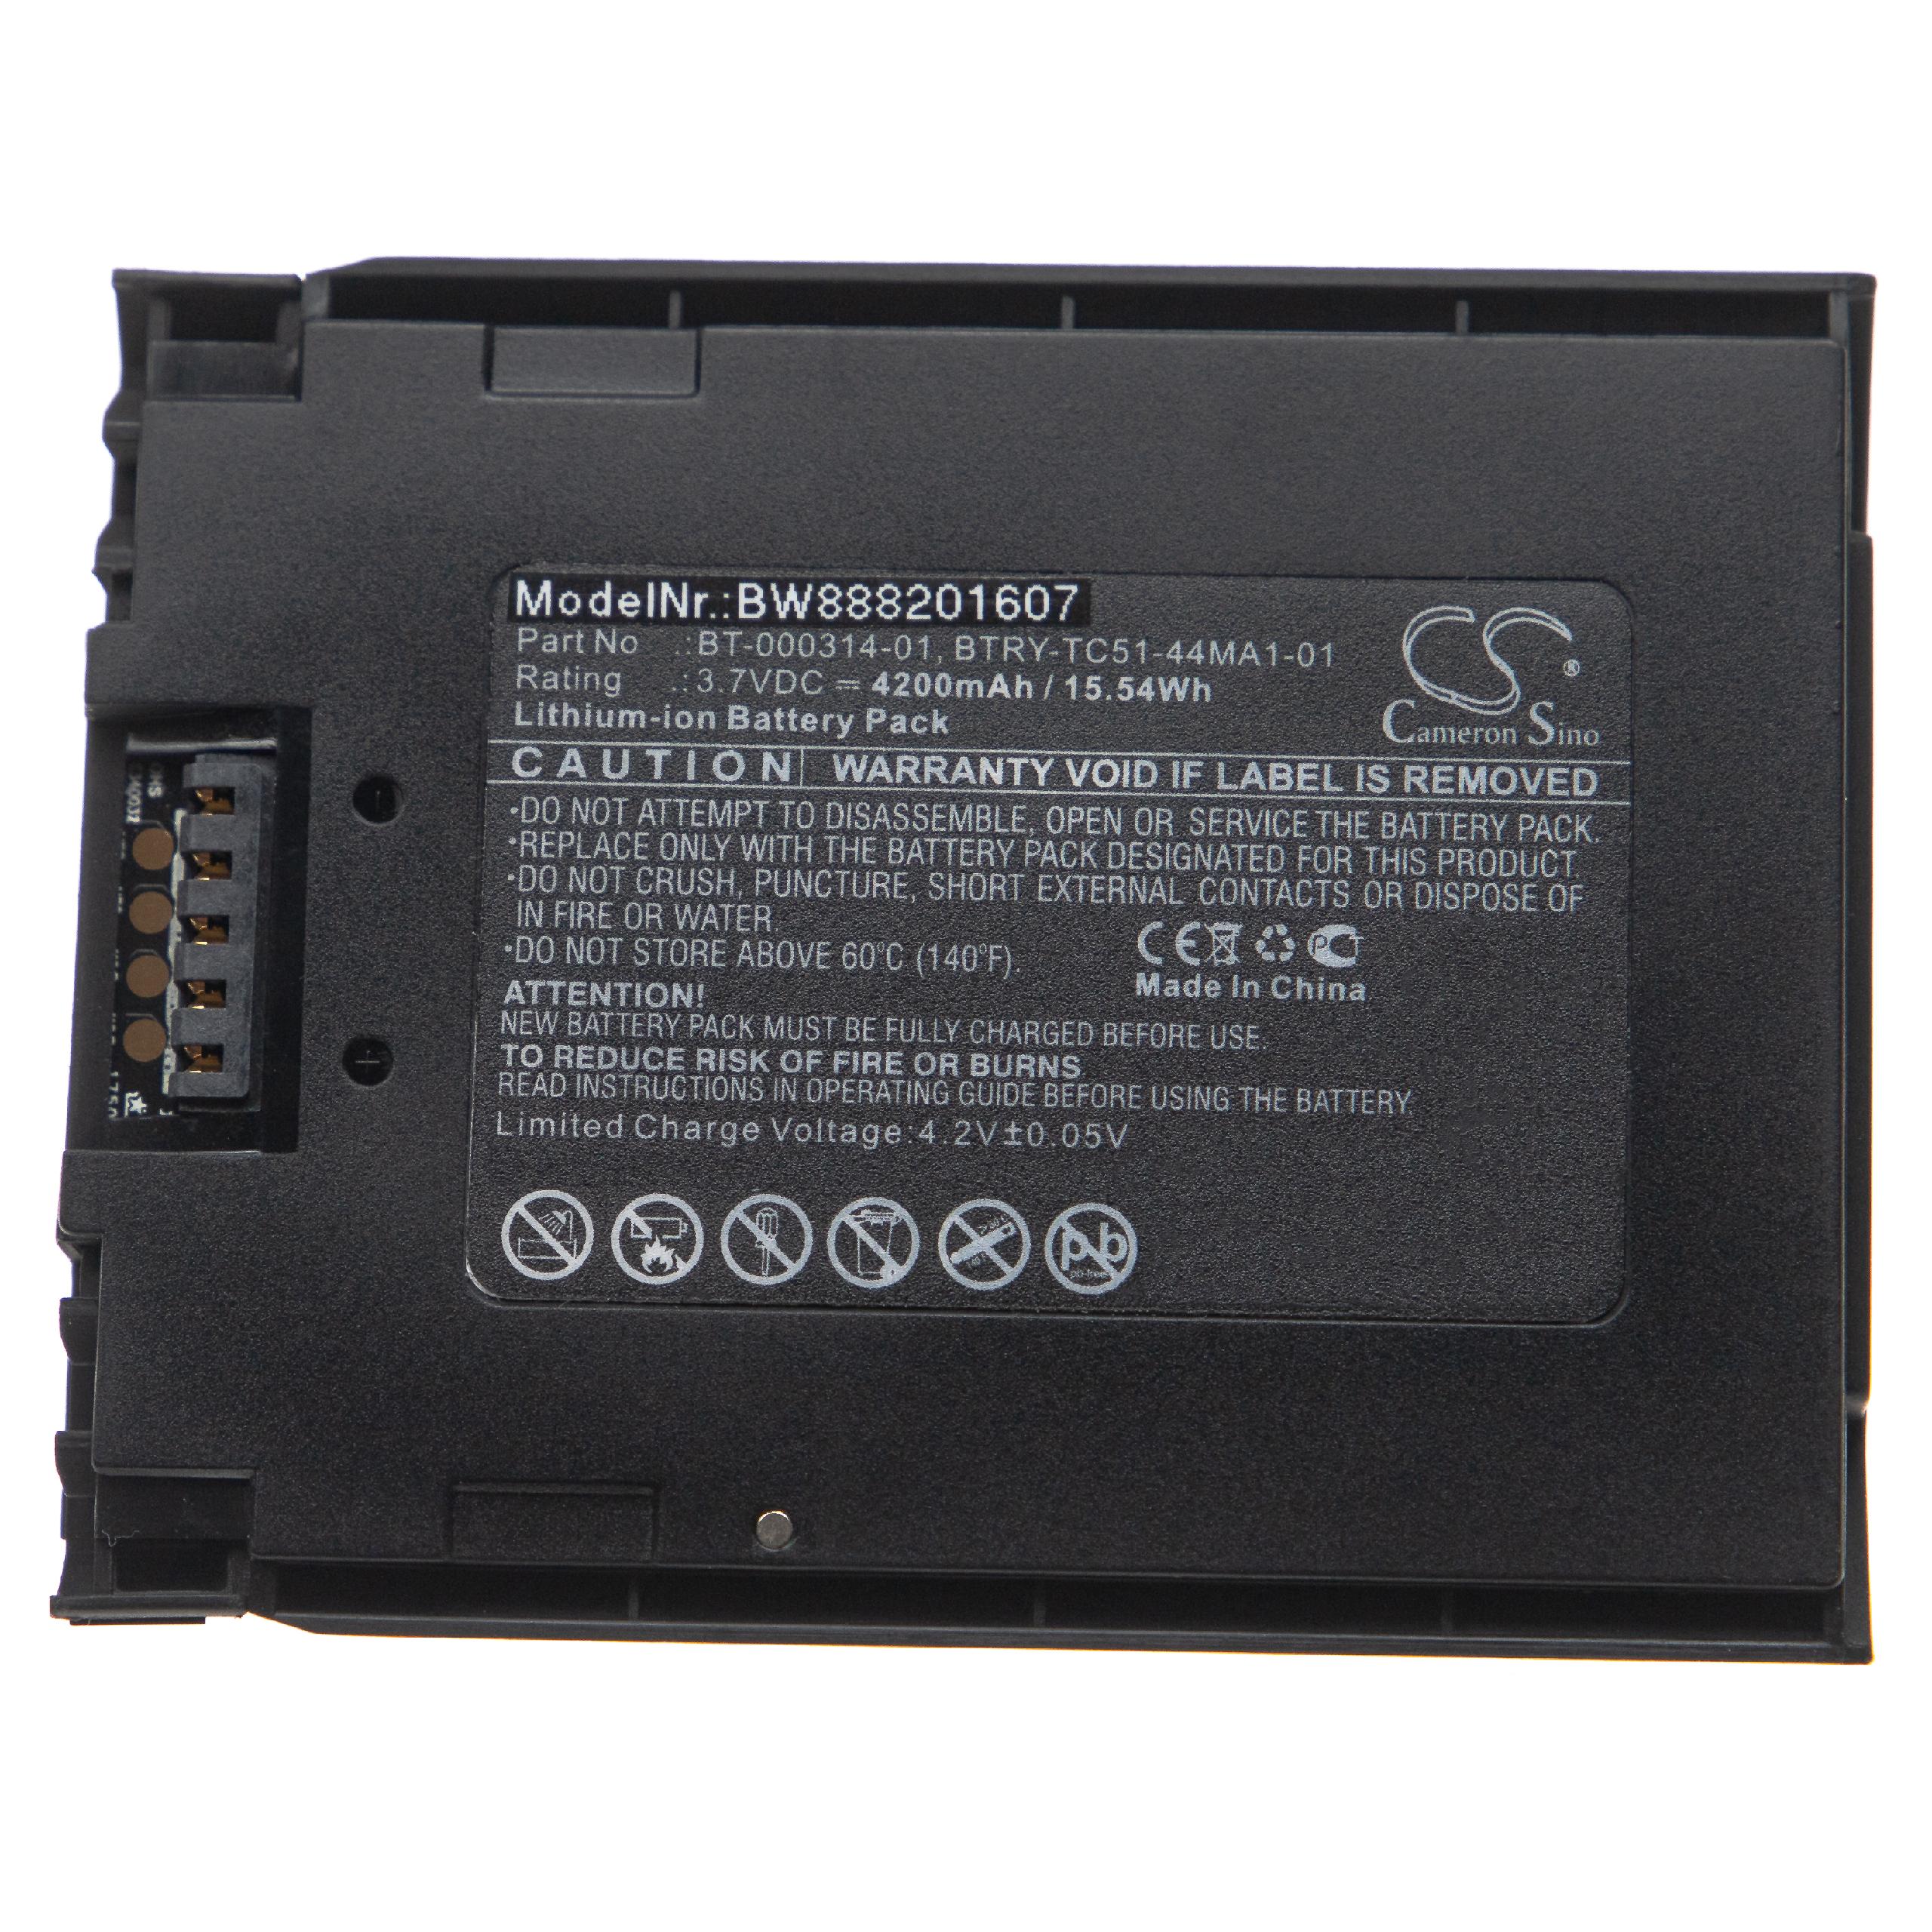 Handheld Computer Battery Replacement for Zebra BT-000314-01, BTRY-TC51-43MA1-01, BT-000314A - 4200mAh, 3.7V